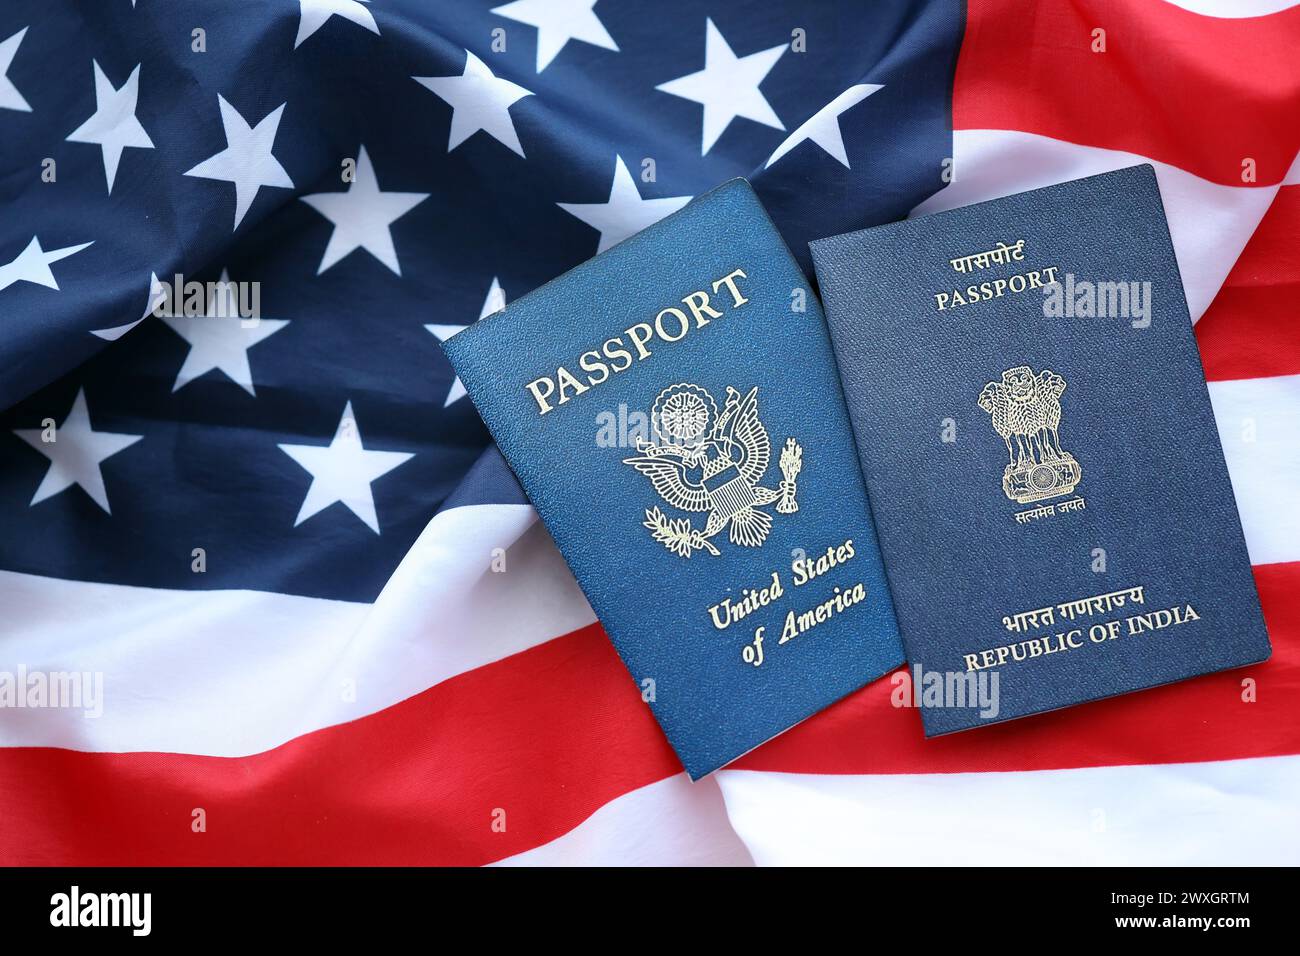 Passport of India with US Passport on United States of America folded flag close up Stock Photo